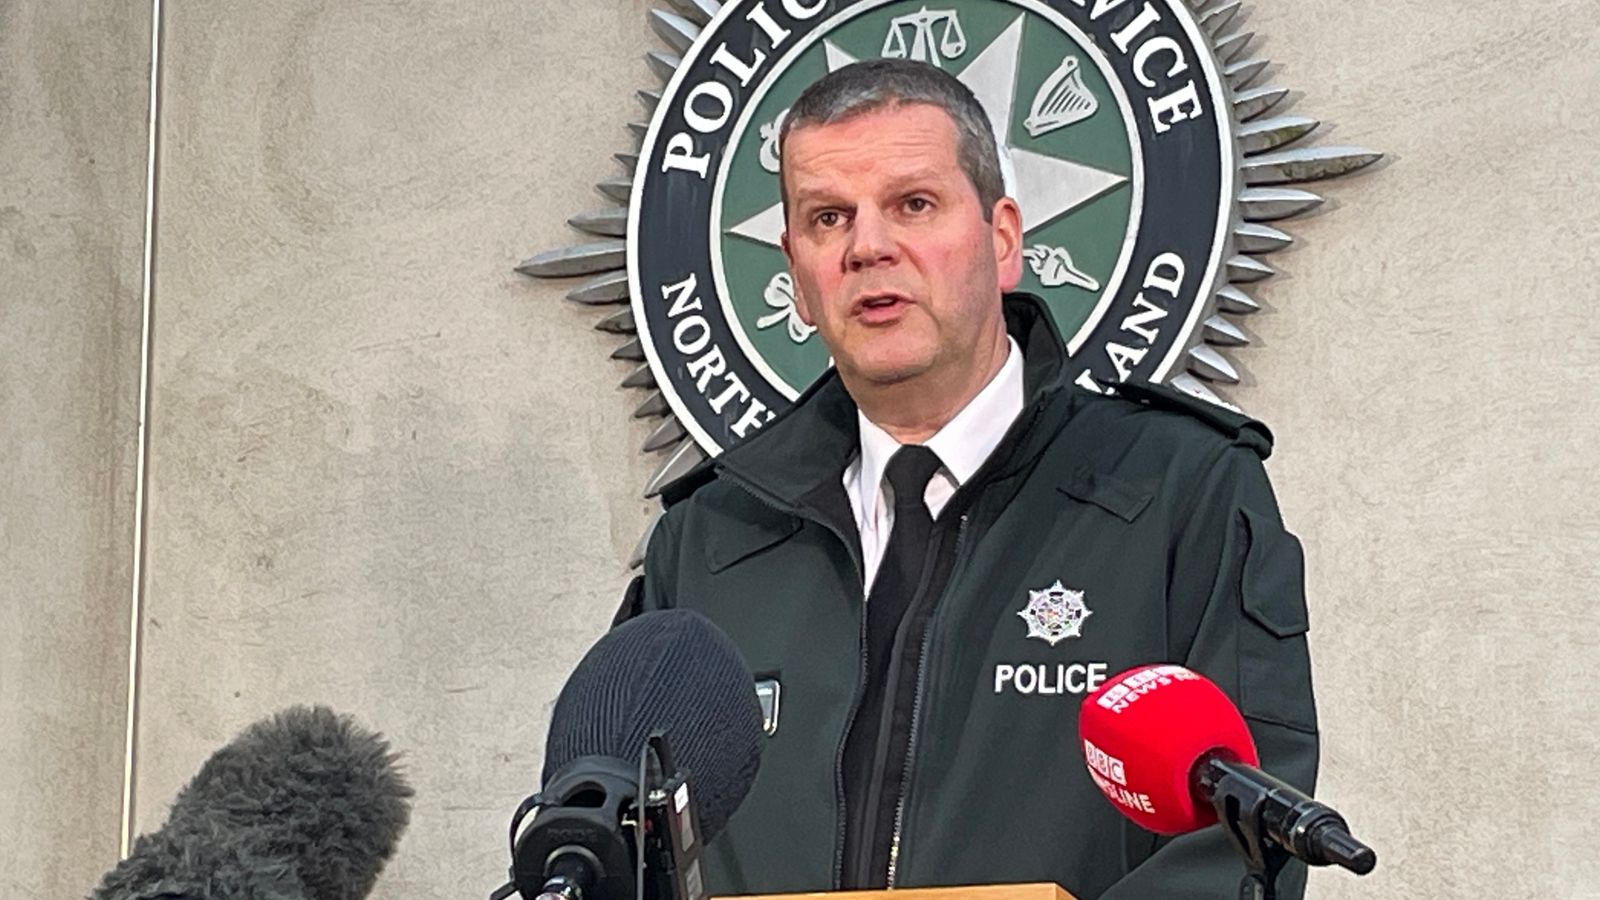 Every police officer in Northern Ireland has data compromised in 'monumental' breach due to human error